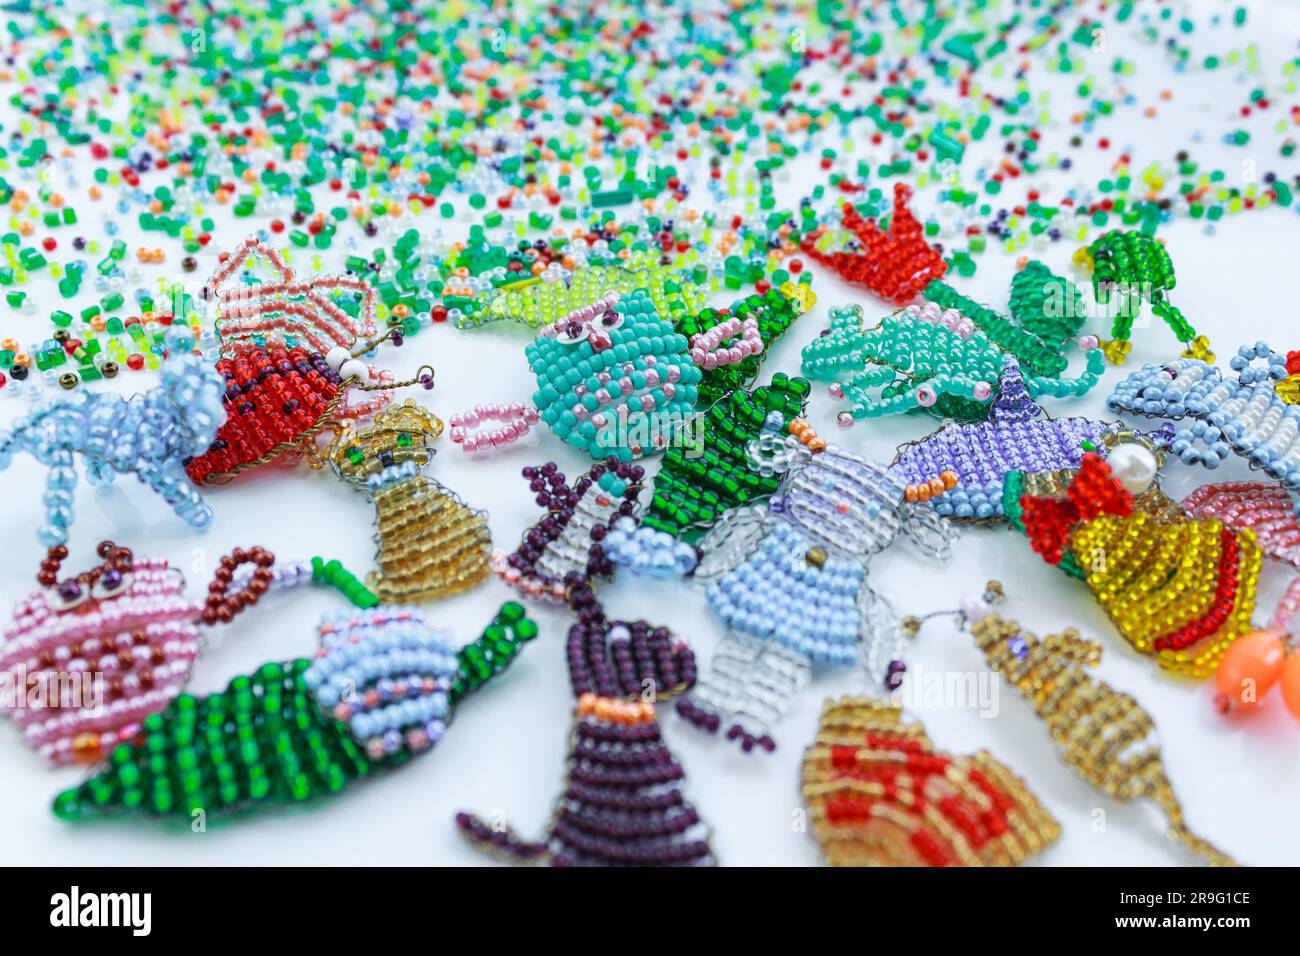 Small multi-colored beads on a white background. Small colored figurines of plants and animals woven from beads. Stock Photo